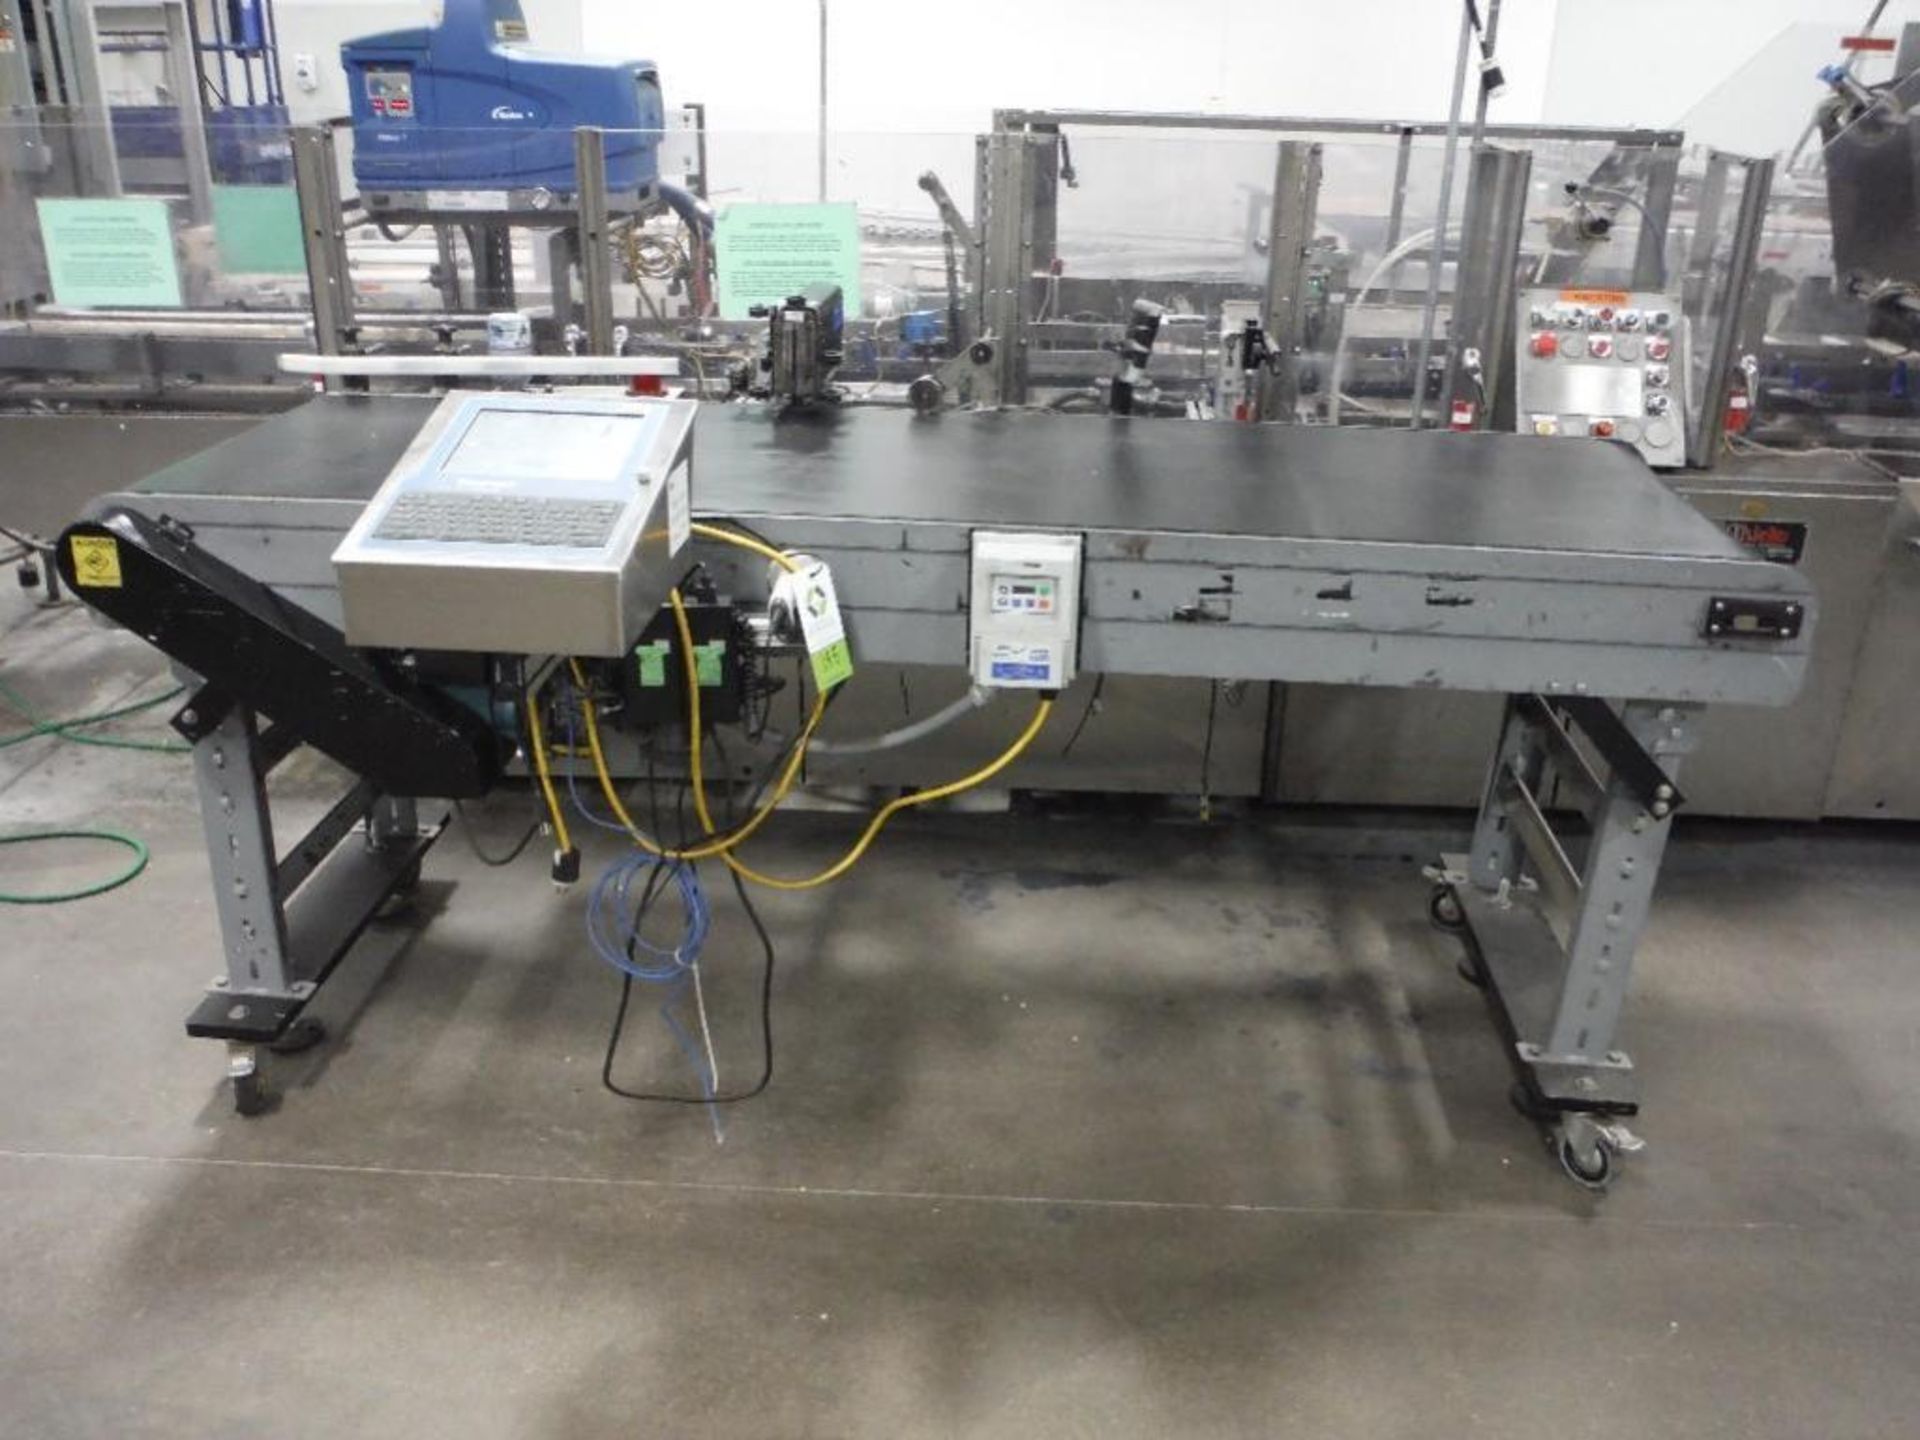 Diagraph IJ3000 xls ink jet coder with conveyor bed, 92 in. long x 27 in. wide x 40 in. tall, steel